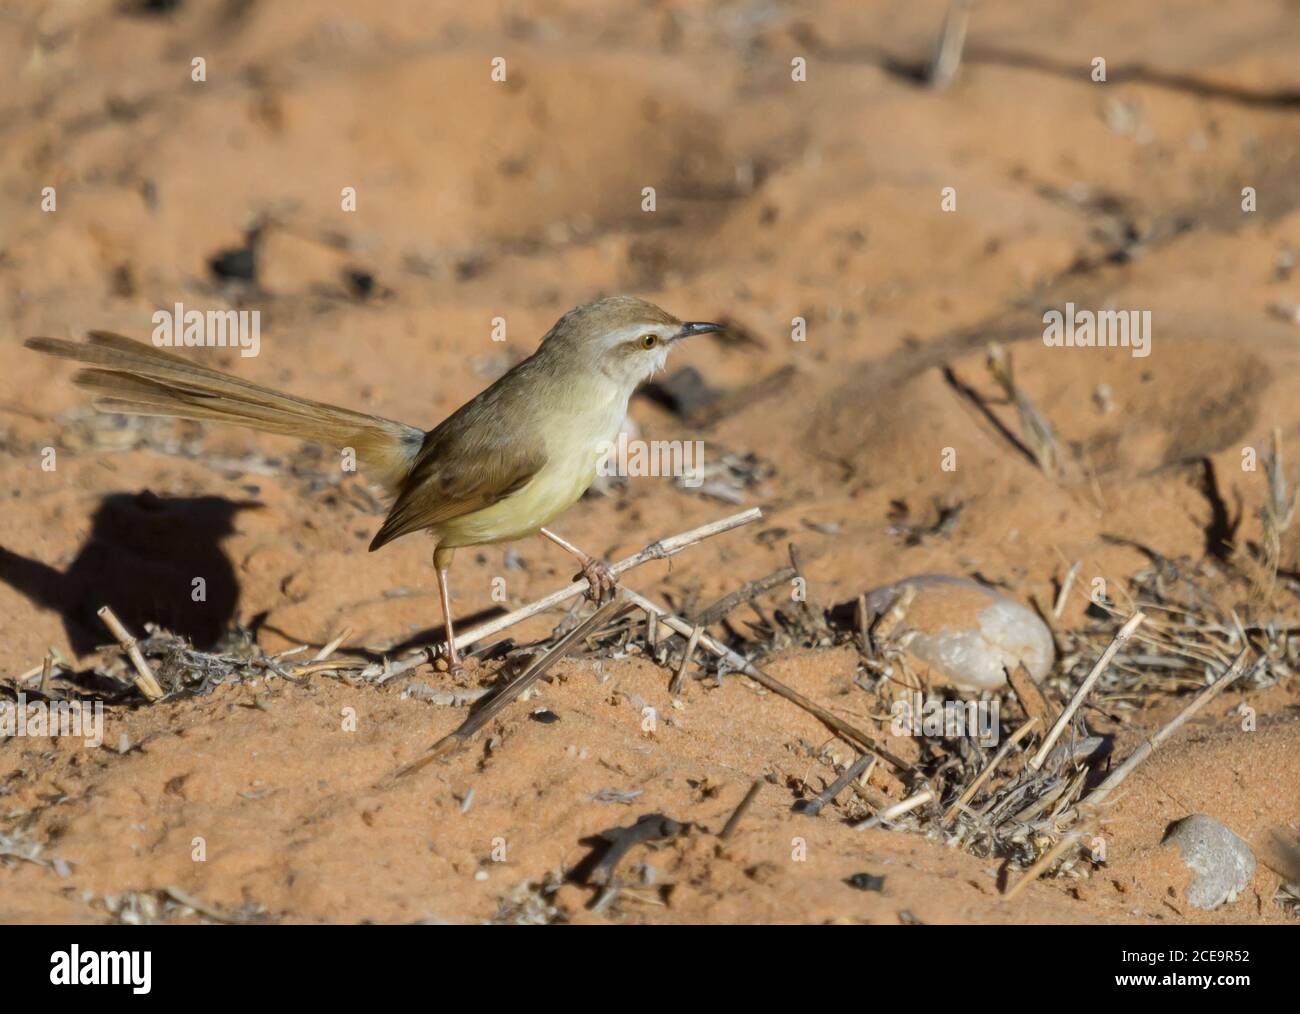 Black-chested prinia (Prinia flavicans) perched on a small stick on the ground in the Kalahari, South Africa Stock Photo